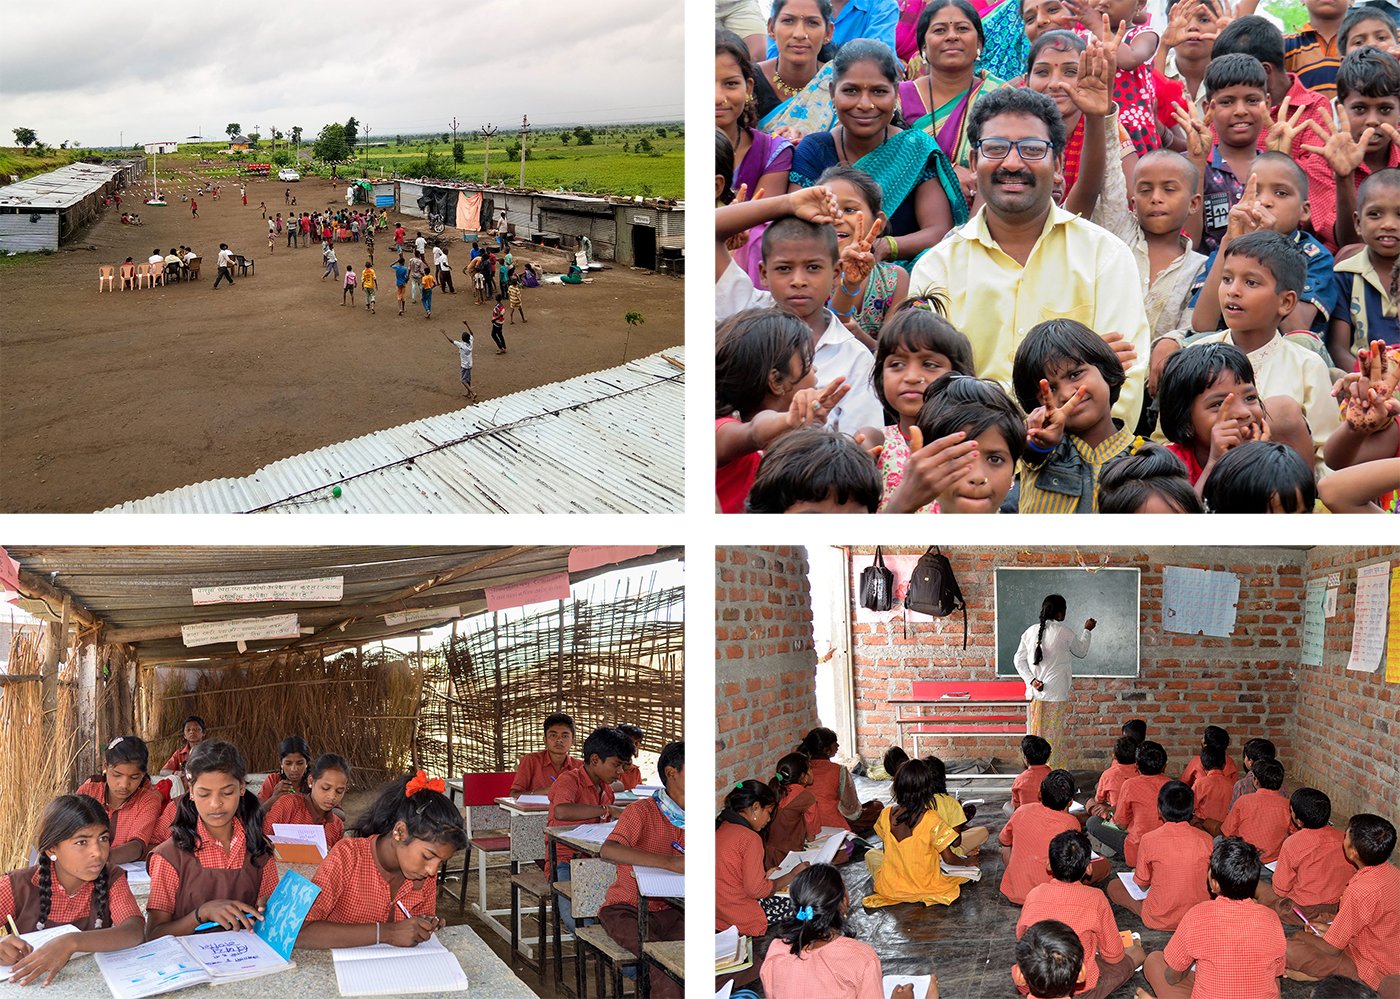 Top left - School Premises
Top right - Matin Bhosale with his students
Bottom left - Students inside a thatched hut classroom
Bottom right - Students in semi concretised classroom